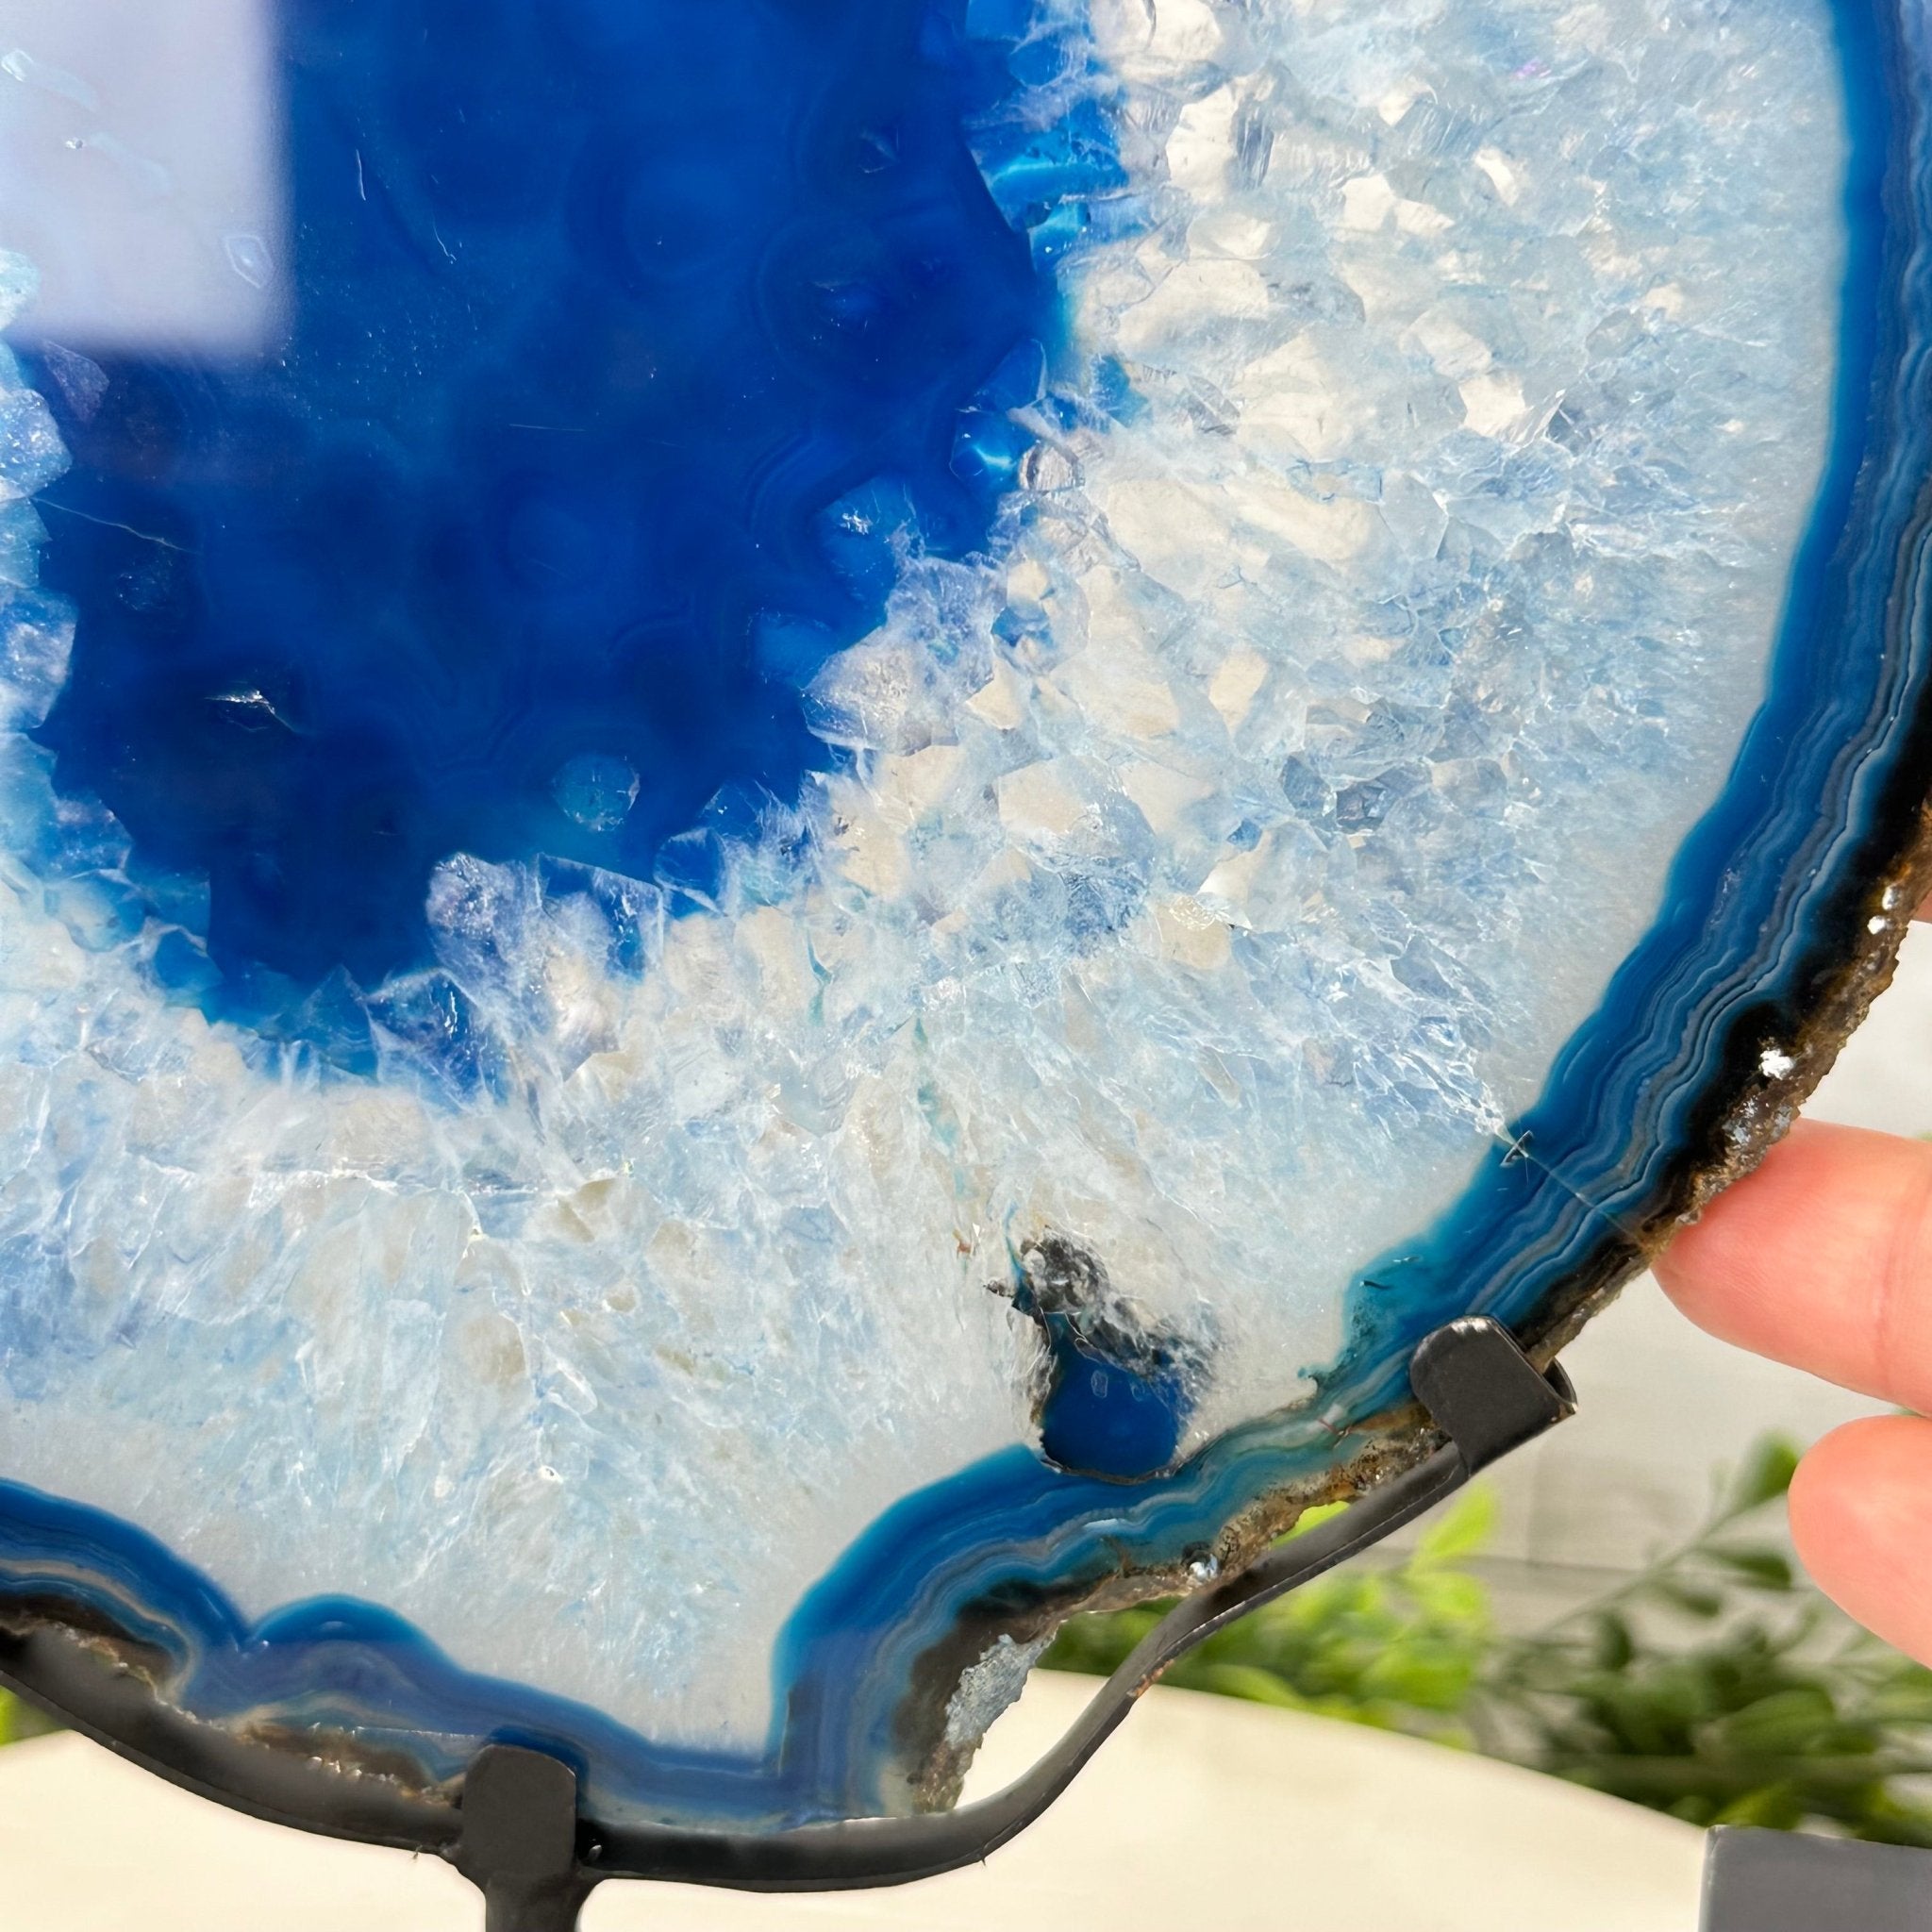 Brazilian Blue Agate Slice on a Metal Stand, 12" Tall #5055-0137 - Brazil GemsBrazil GemsBrazilian Blue Agate Slice on a Metal Stand, 12" Tall #5055-0137Slices on Fixed Bases5055-0137